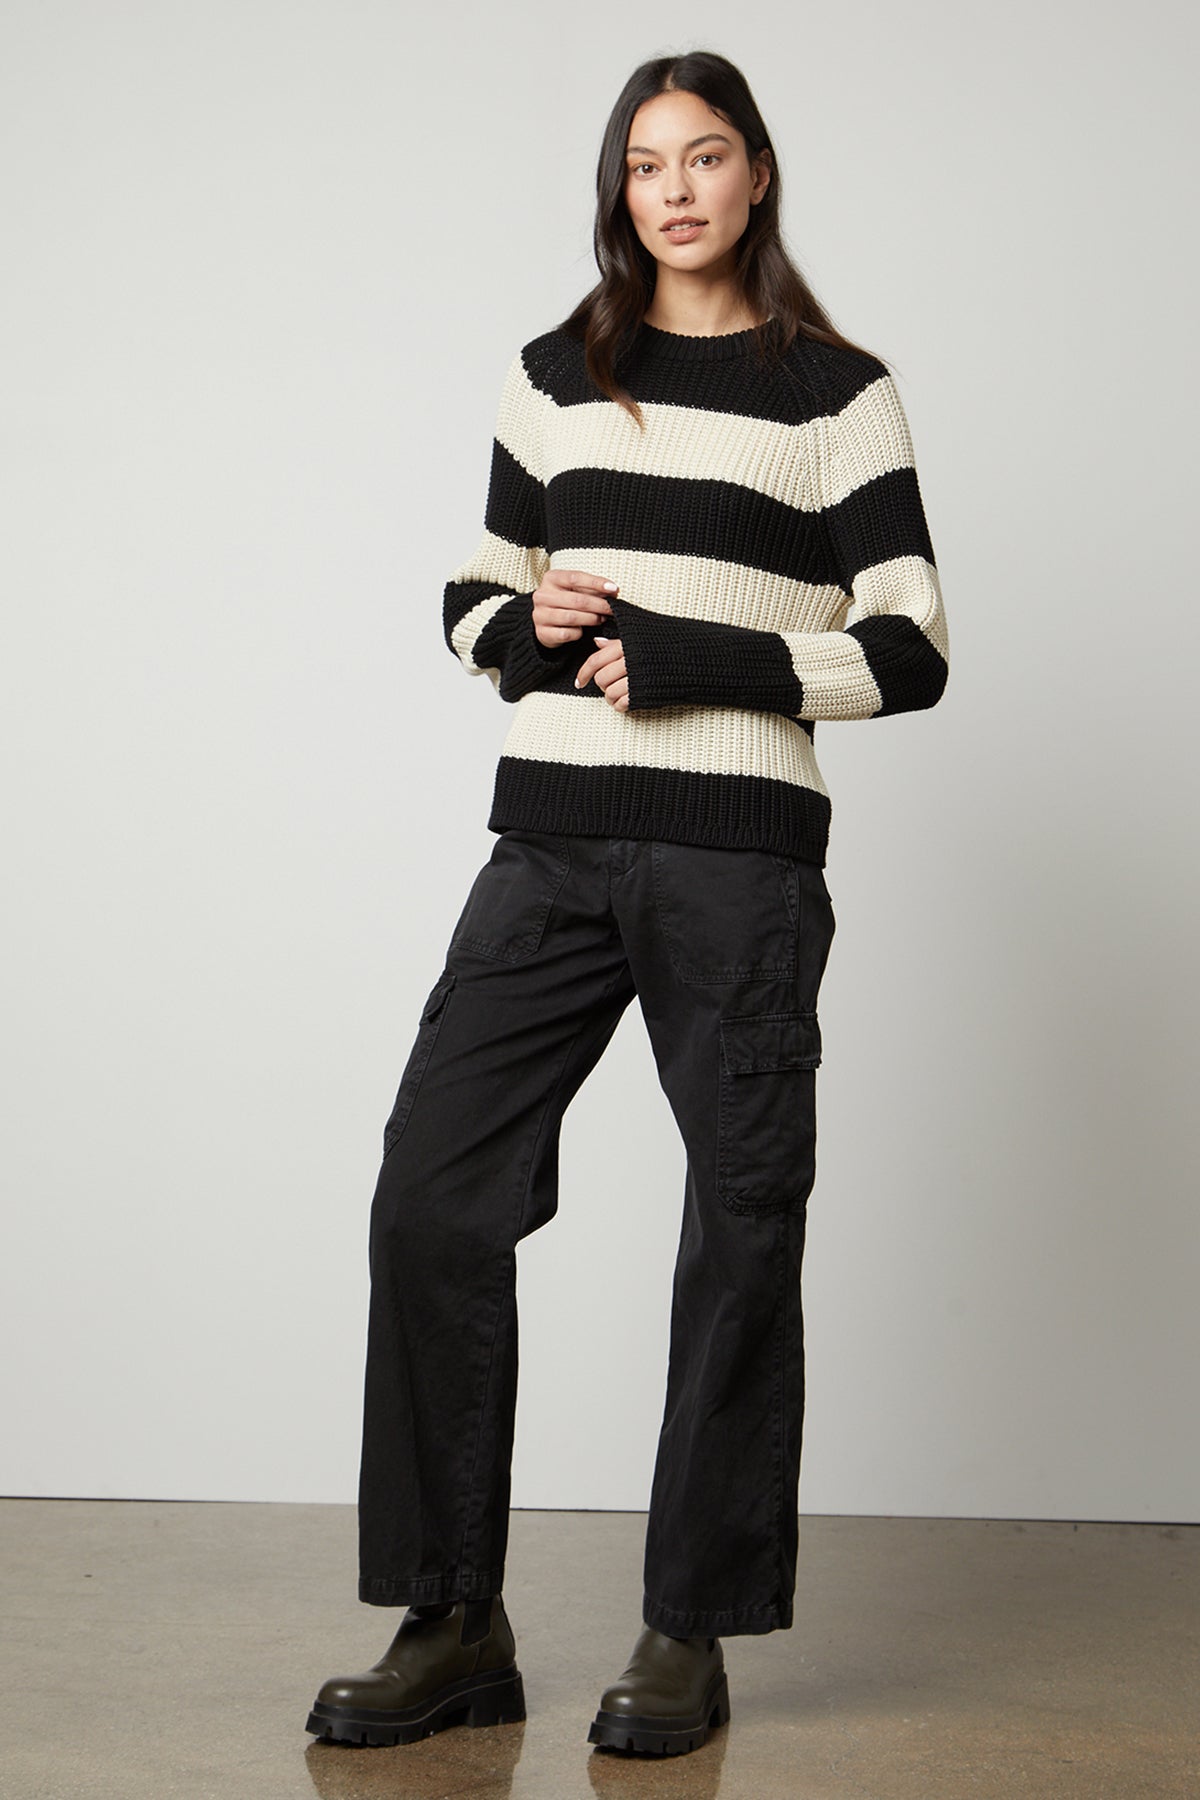 The model is wearing a Velvet by Graham & Spencer CIARA STRIPED CREW NECK SWEATER, providing warmth and comfort.-35507450544321